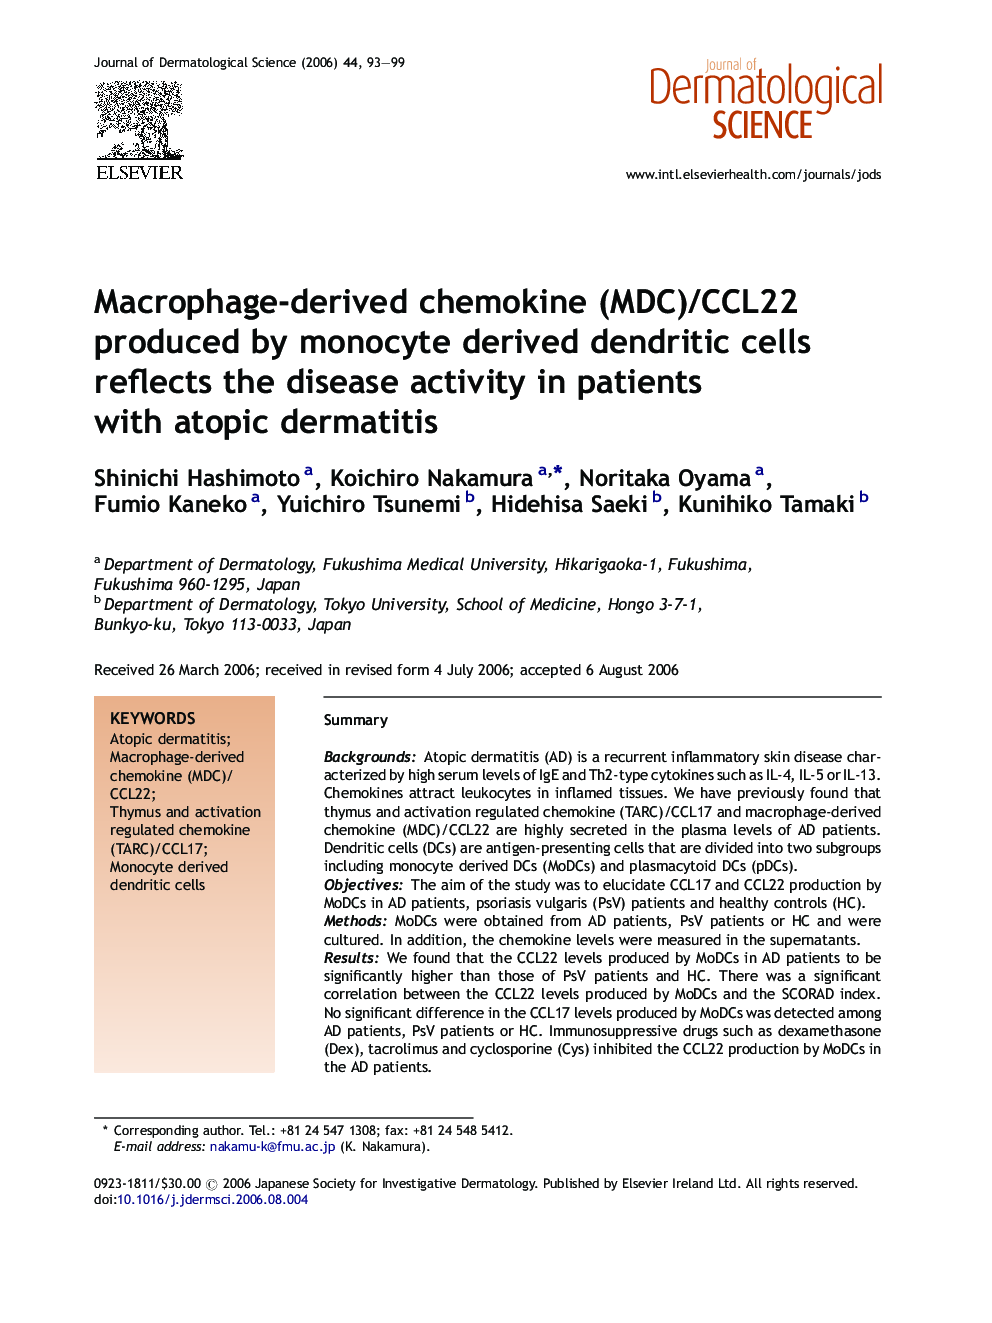 Macrophage-derived chemokine (MDC)/CCL22 produced by monocyte derived dendritic cells reflects the disease activity in patients with atopic dermatitis